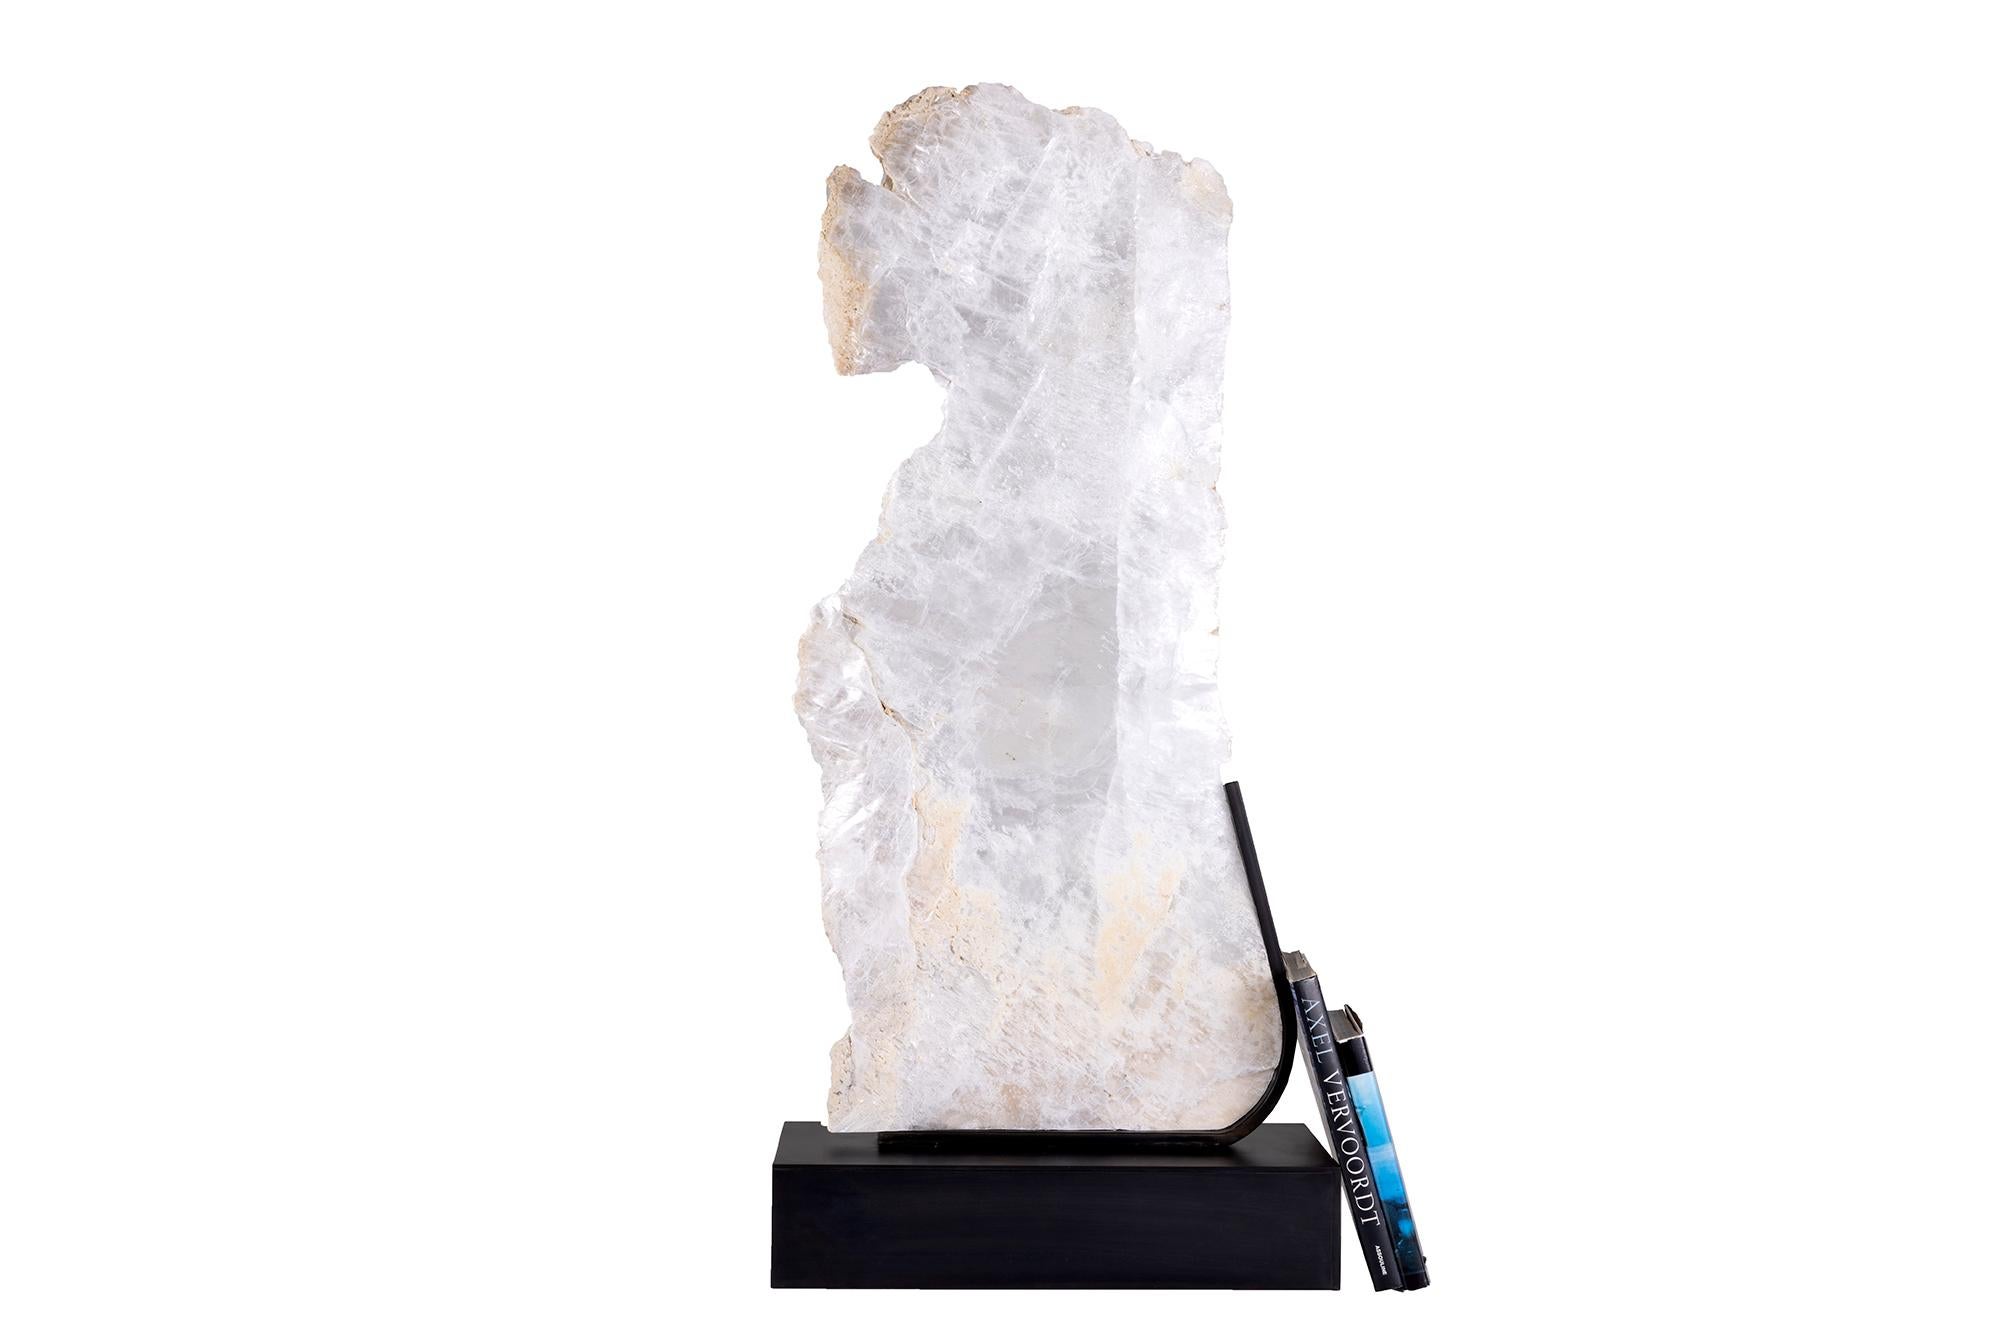 Selenite Sculpture on Mount - Selenite sourced in West Texas 

This piece is a part of Brendan Bass’s one-of-a-kind collection, Le Monde. French for “The World”, the Le Monde collection is made up of rare and hard to find pieces curated by Brendan